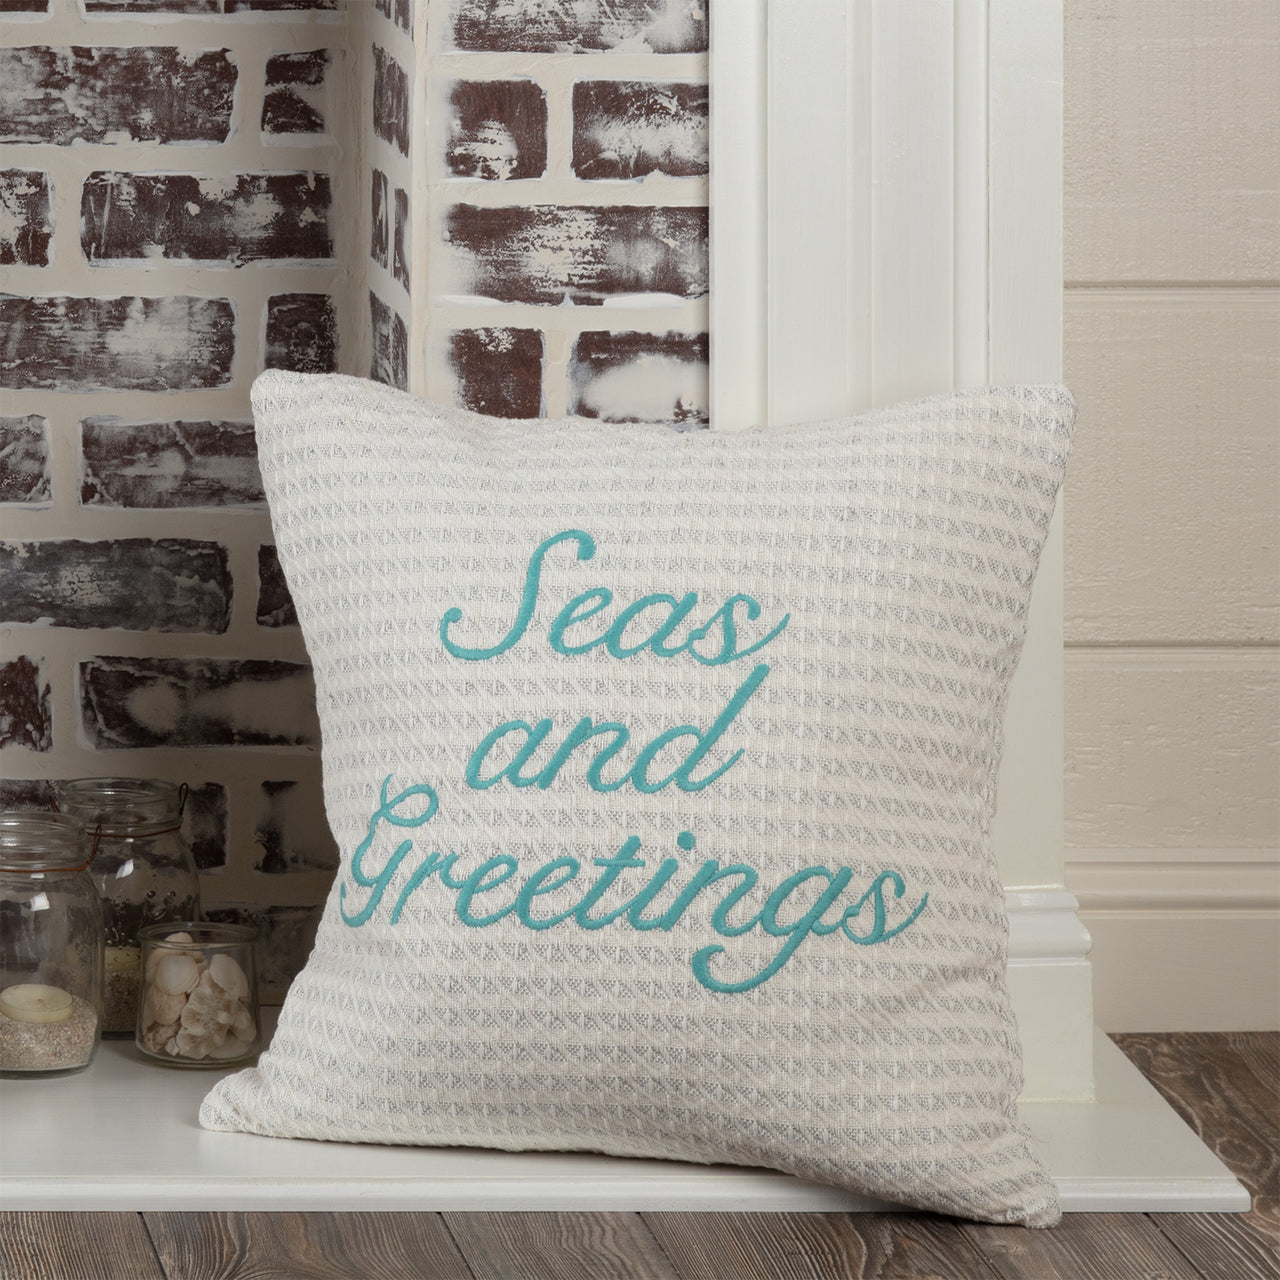 Arielle Seas and Greetings Pillow Cover 18x18 VHC Brands